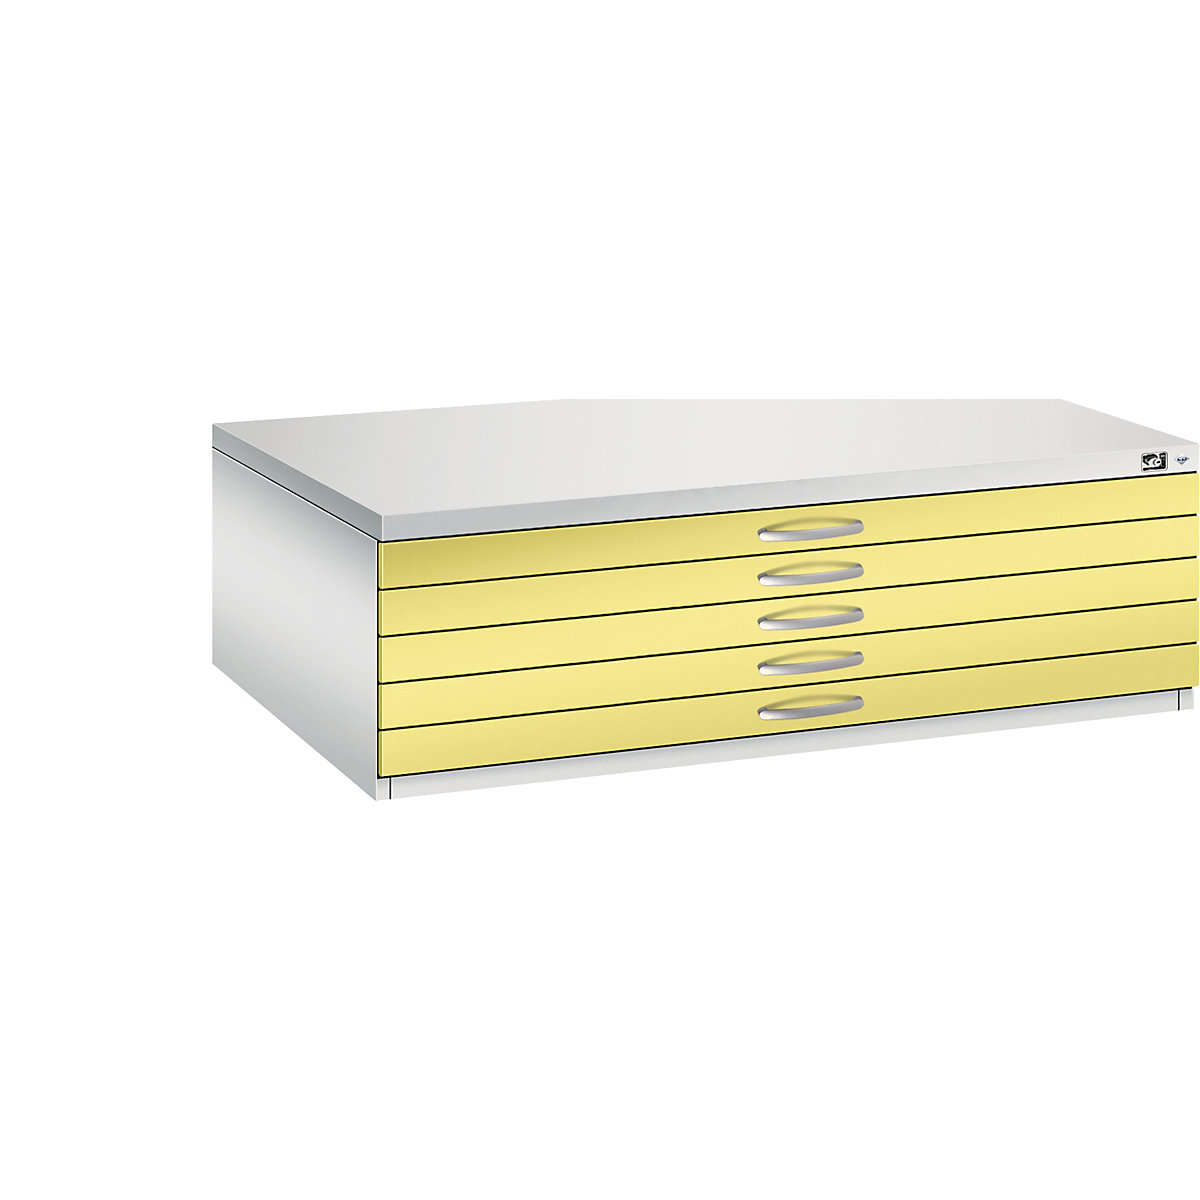 Drawing cabinet – C+P, A0, 5 drawers, height 420 mm, light grey / sulphur yellow-15